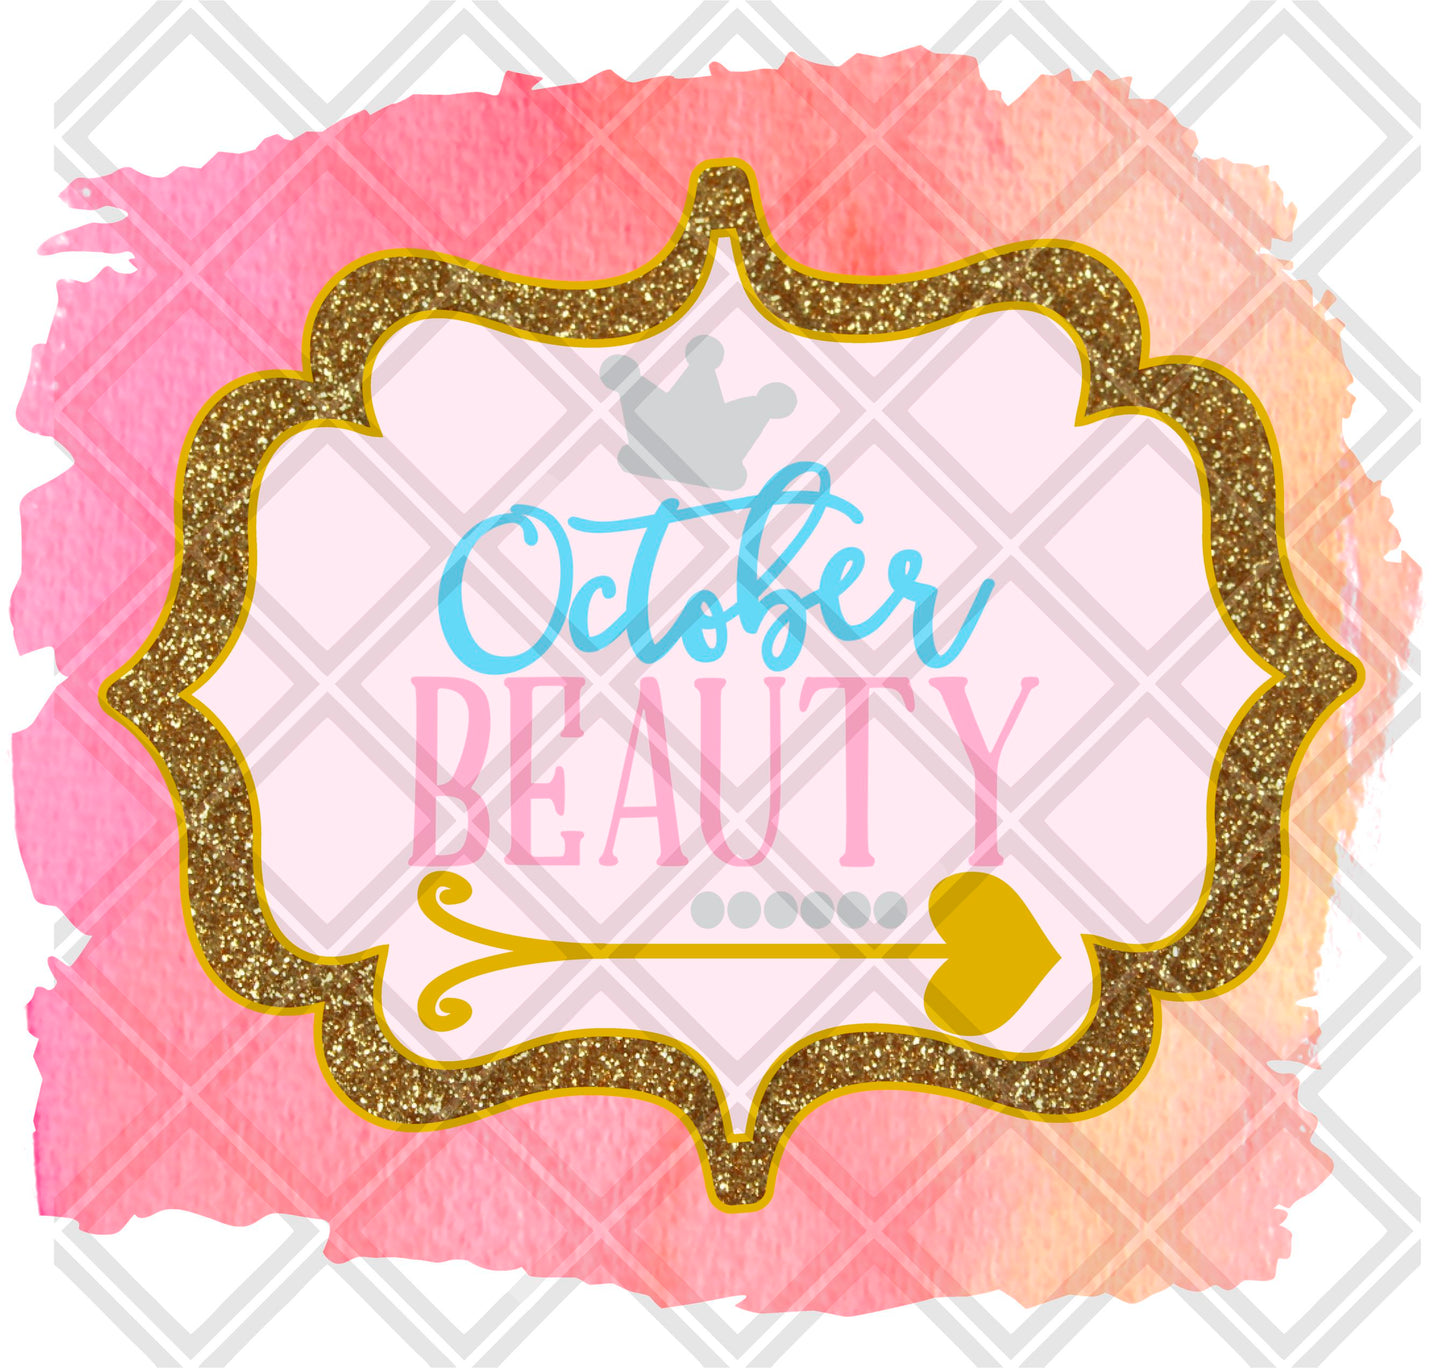 OCTOBER BEAUTY MONTH png Digital Download Instand Download